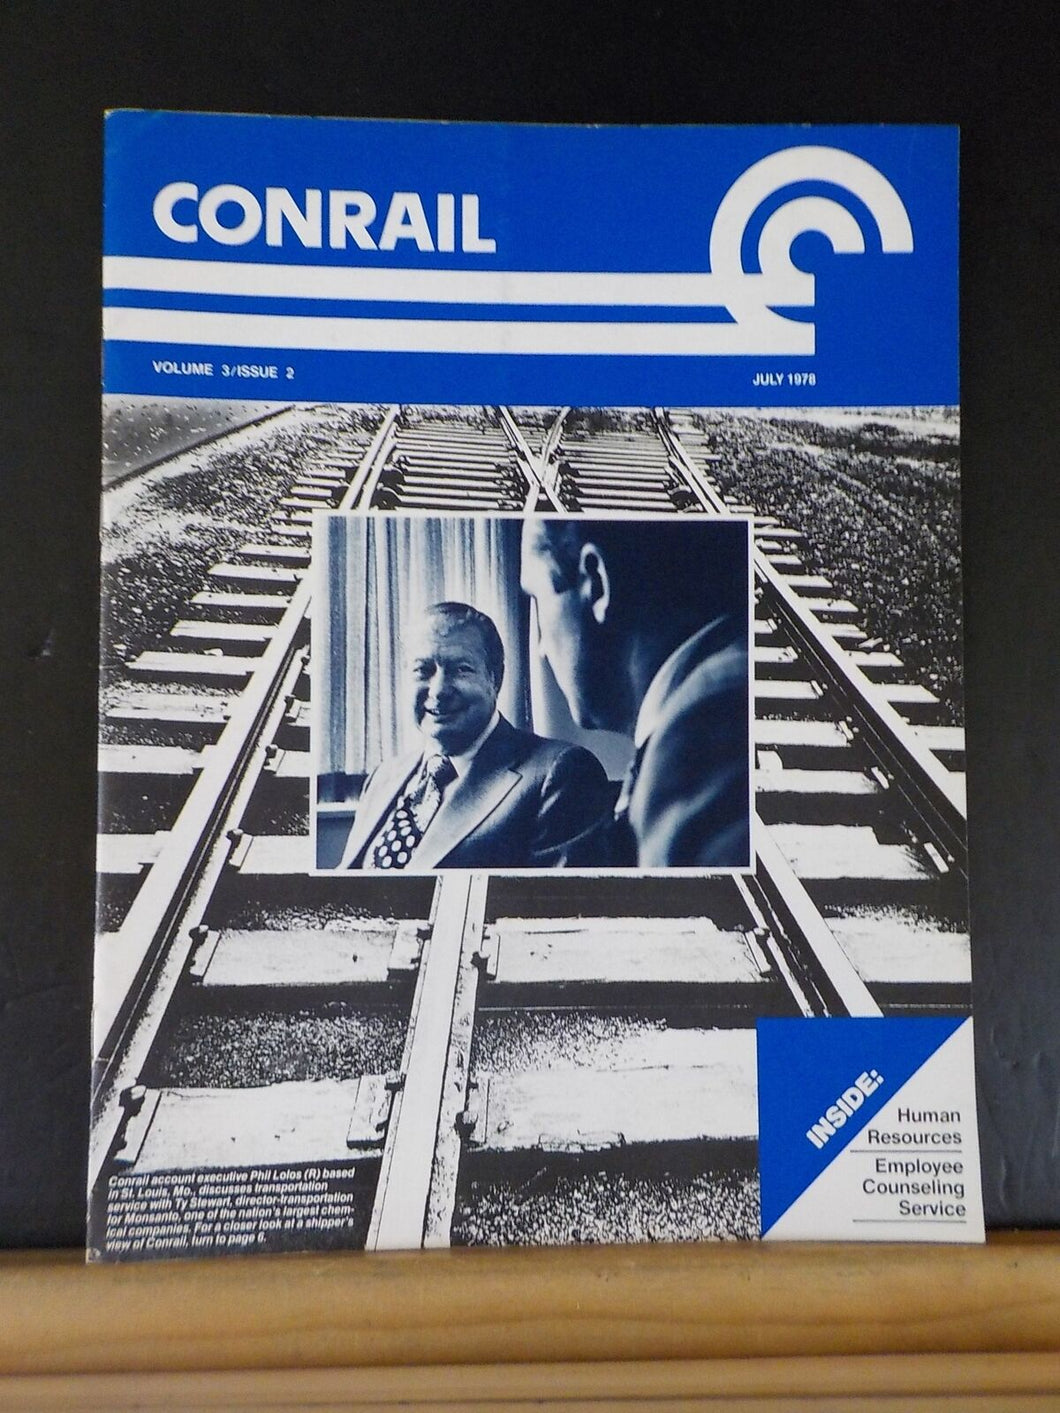 ConRail 1978 July Employee Magazine A shippers view of Conrail Reading repairing